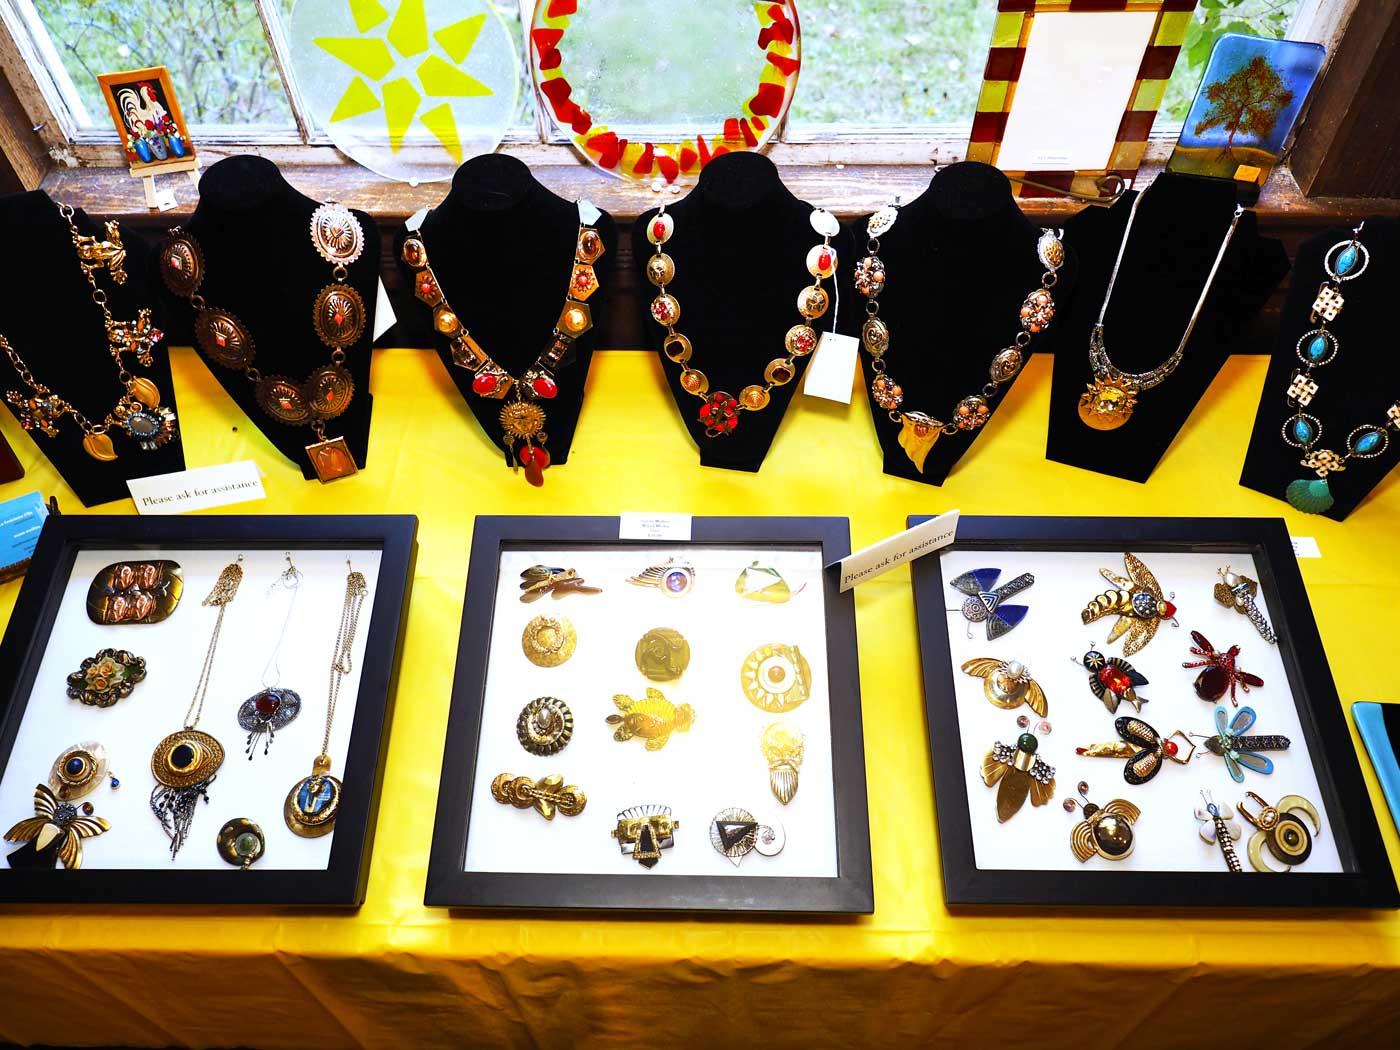 35th Annual Columbus Day Weekend Arts and Fine Crafts Show